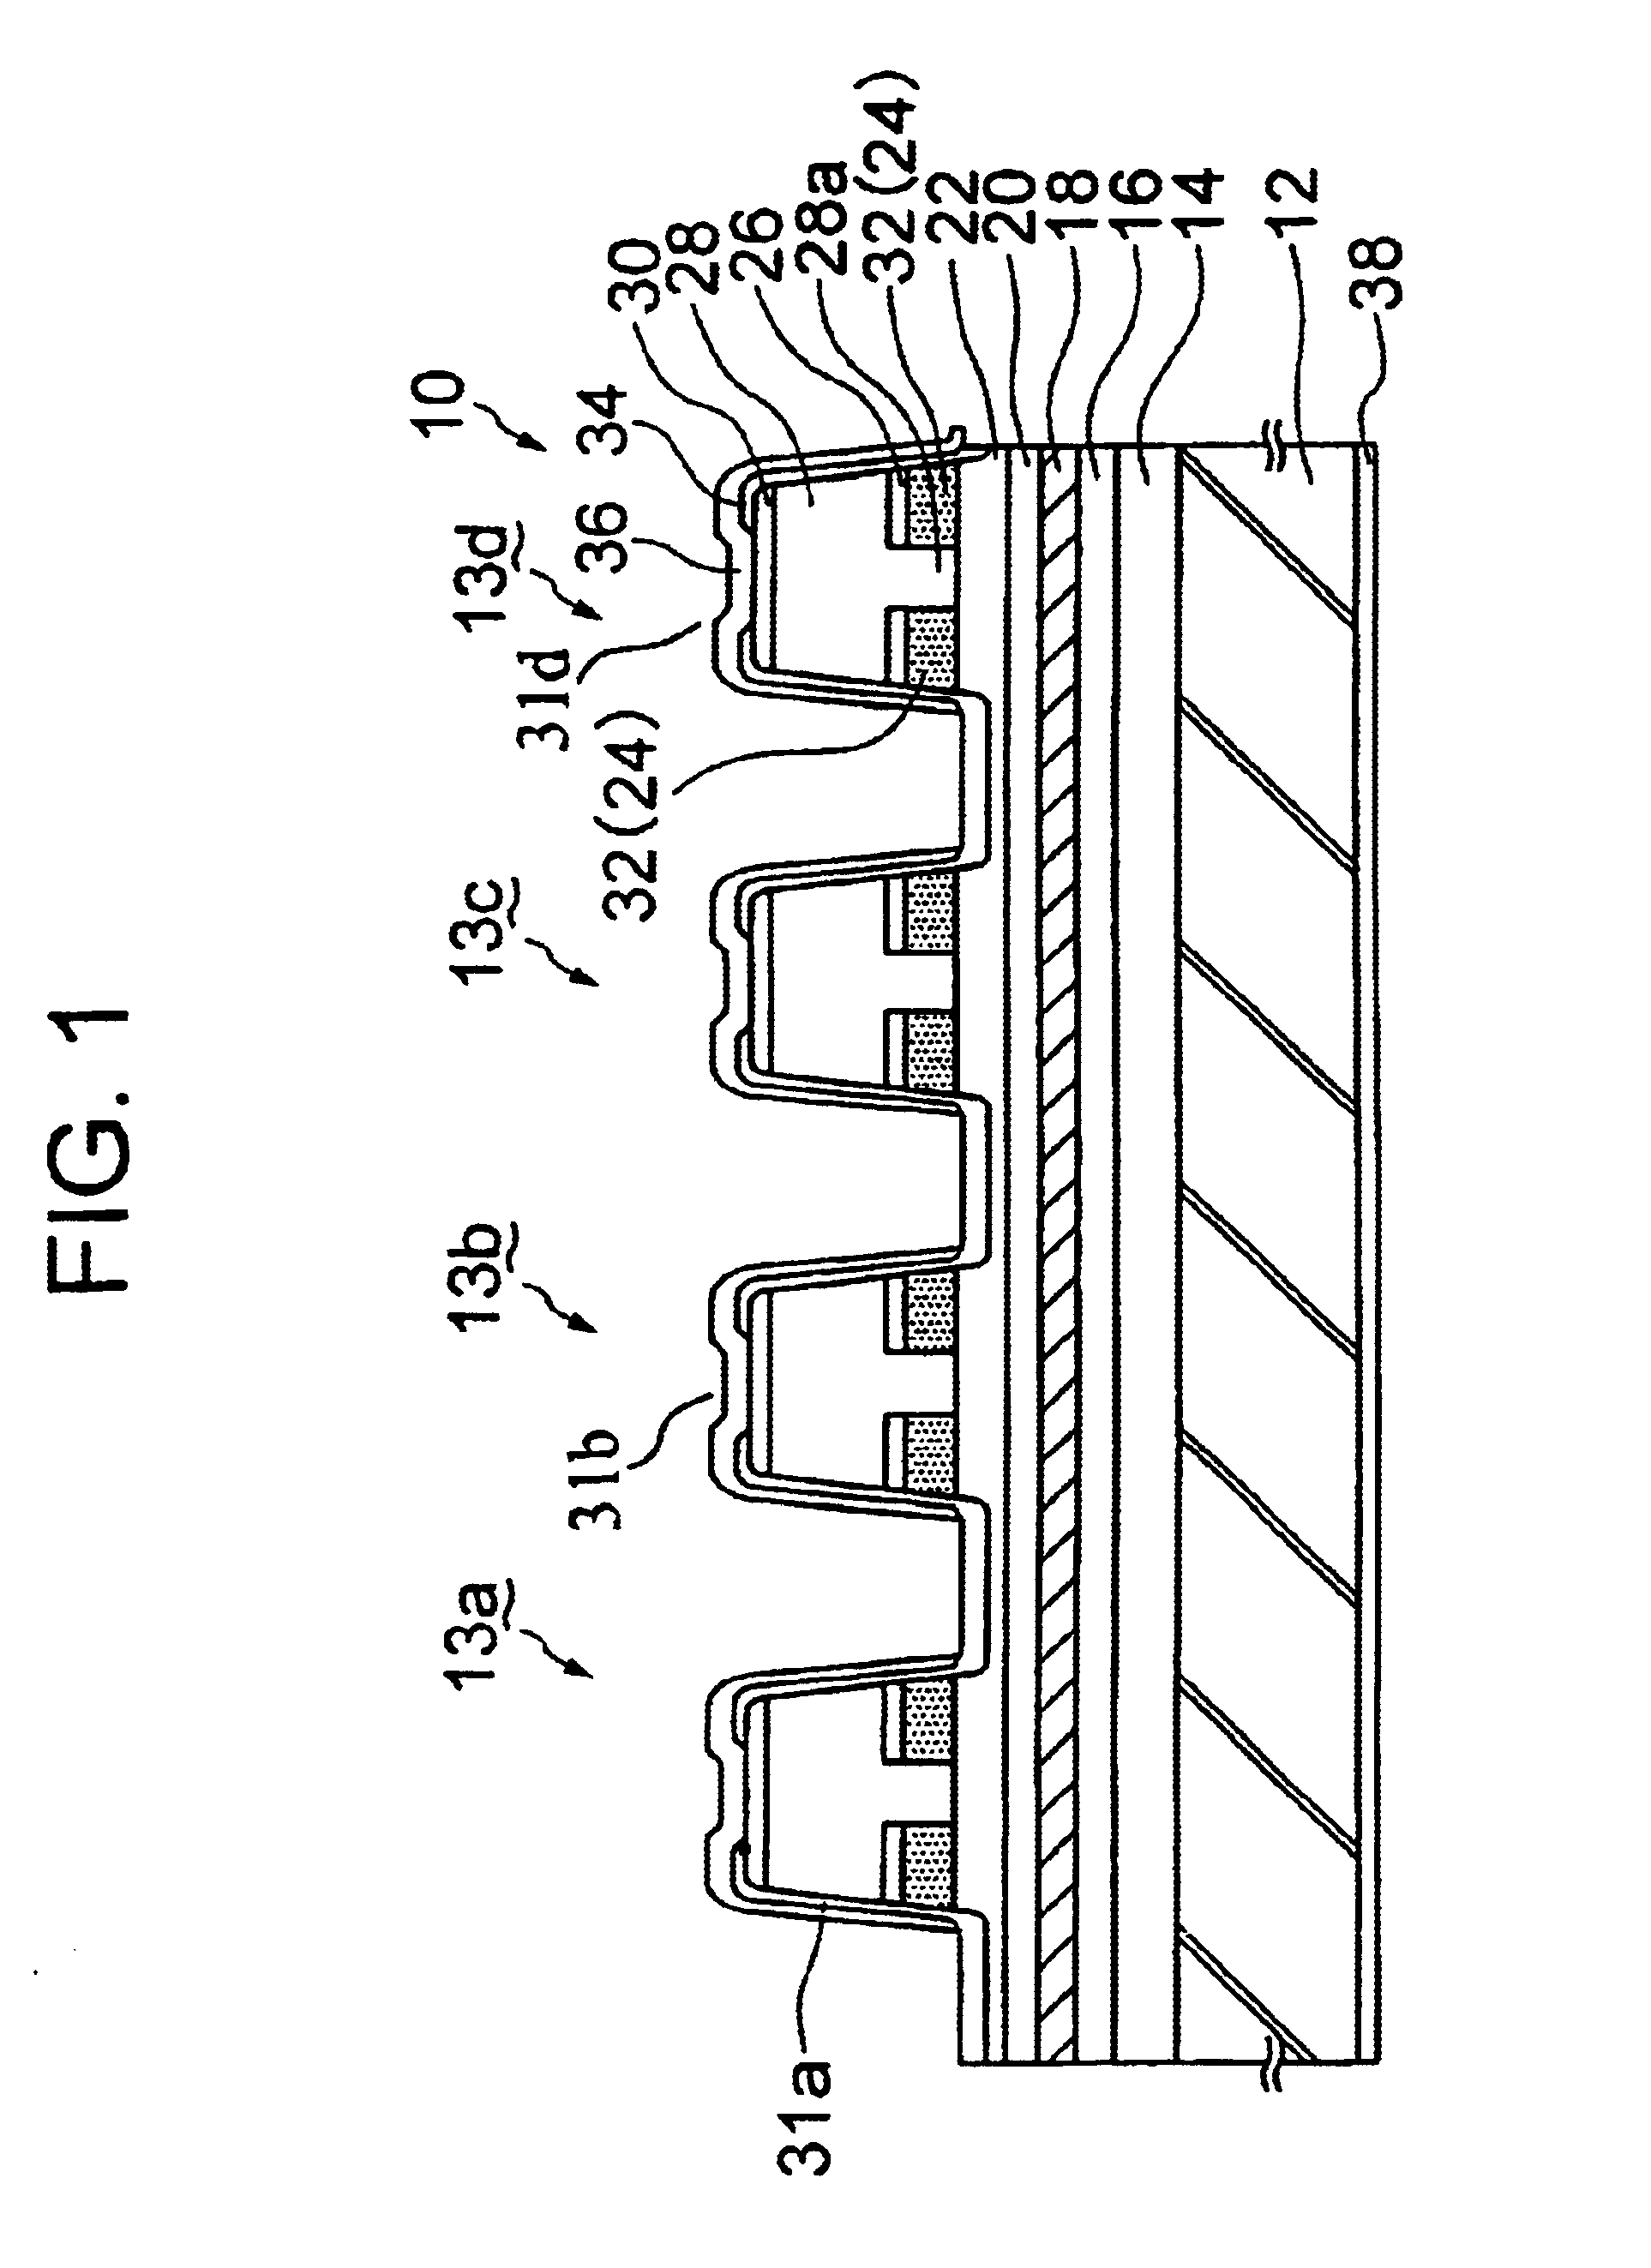 Distributed feedback semiconductor laser device and multi-wavelength laser array